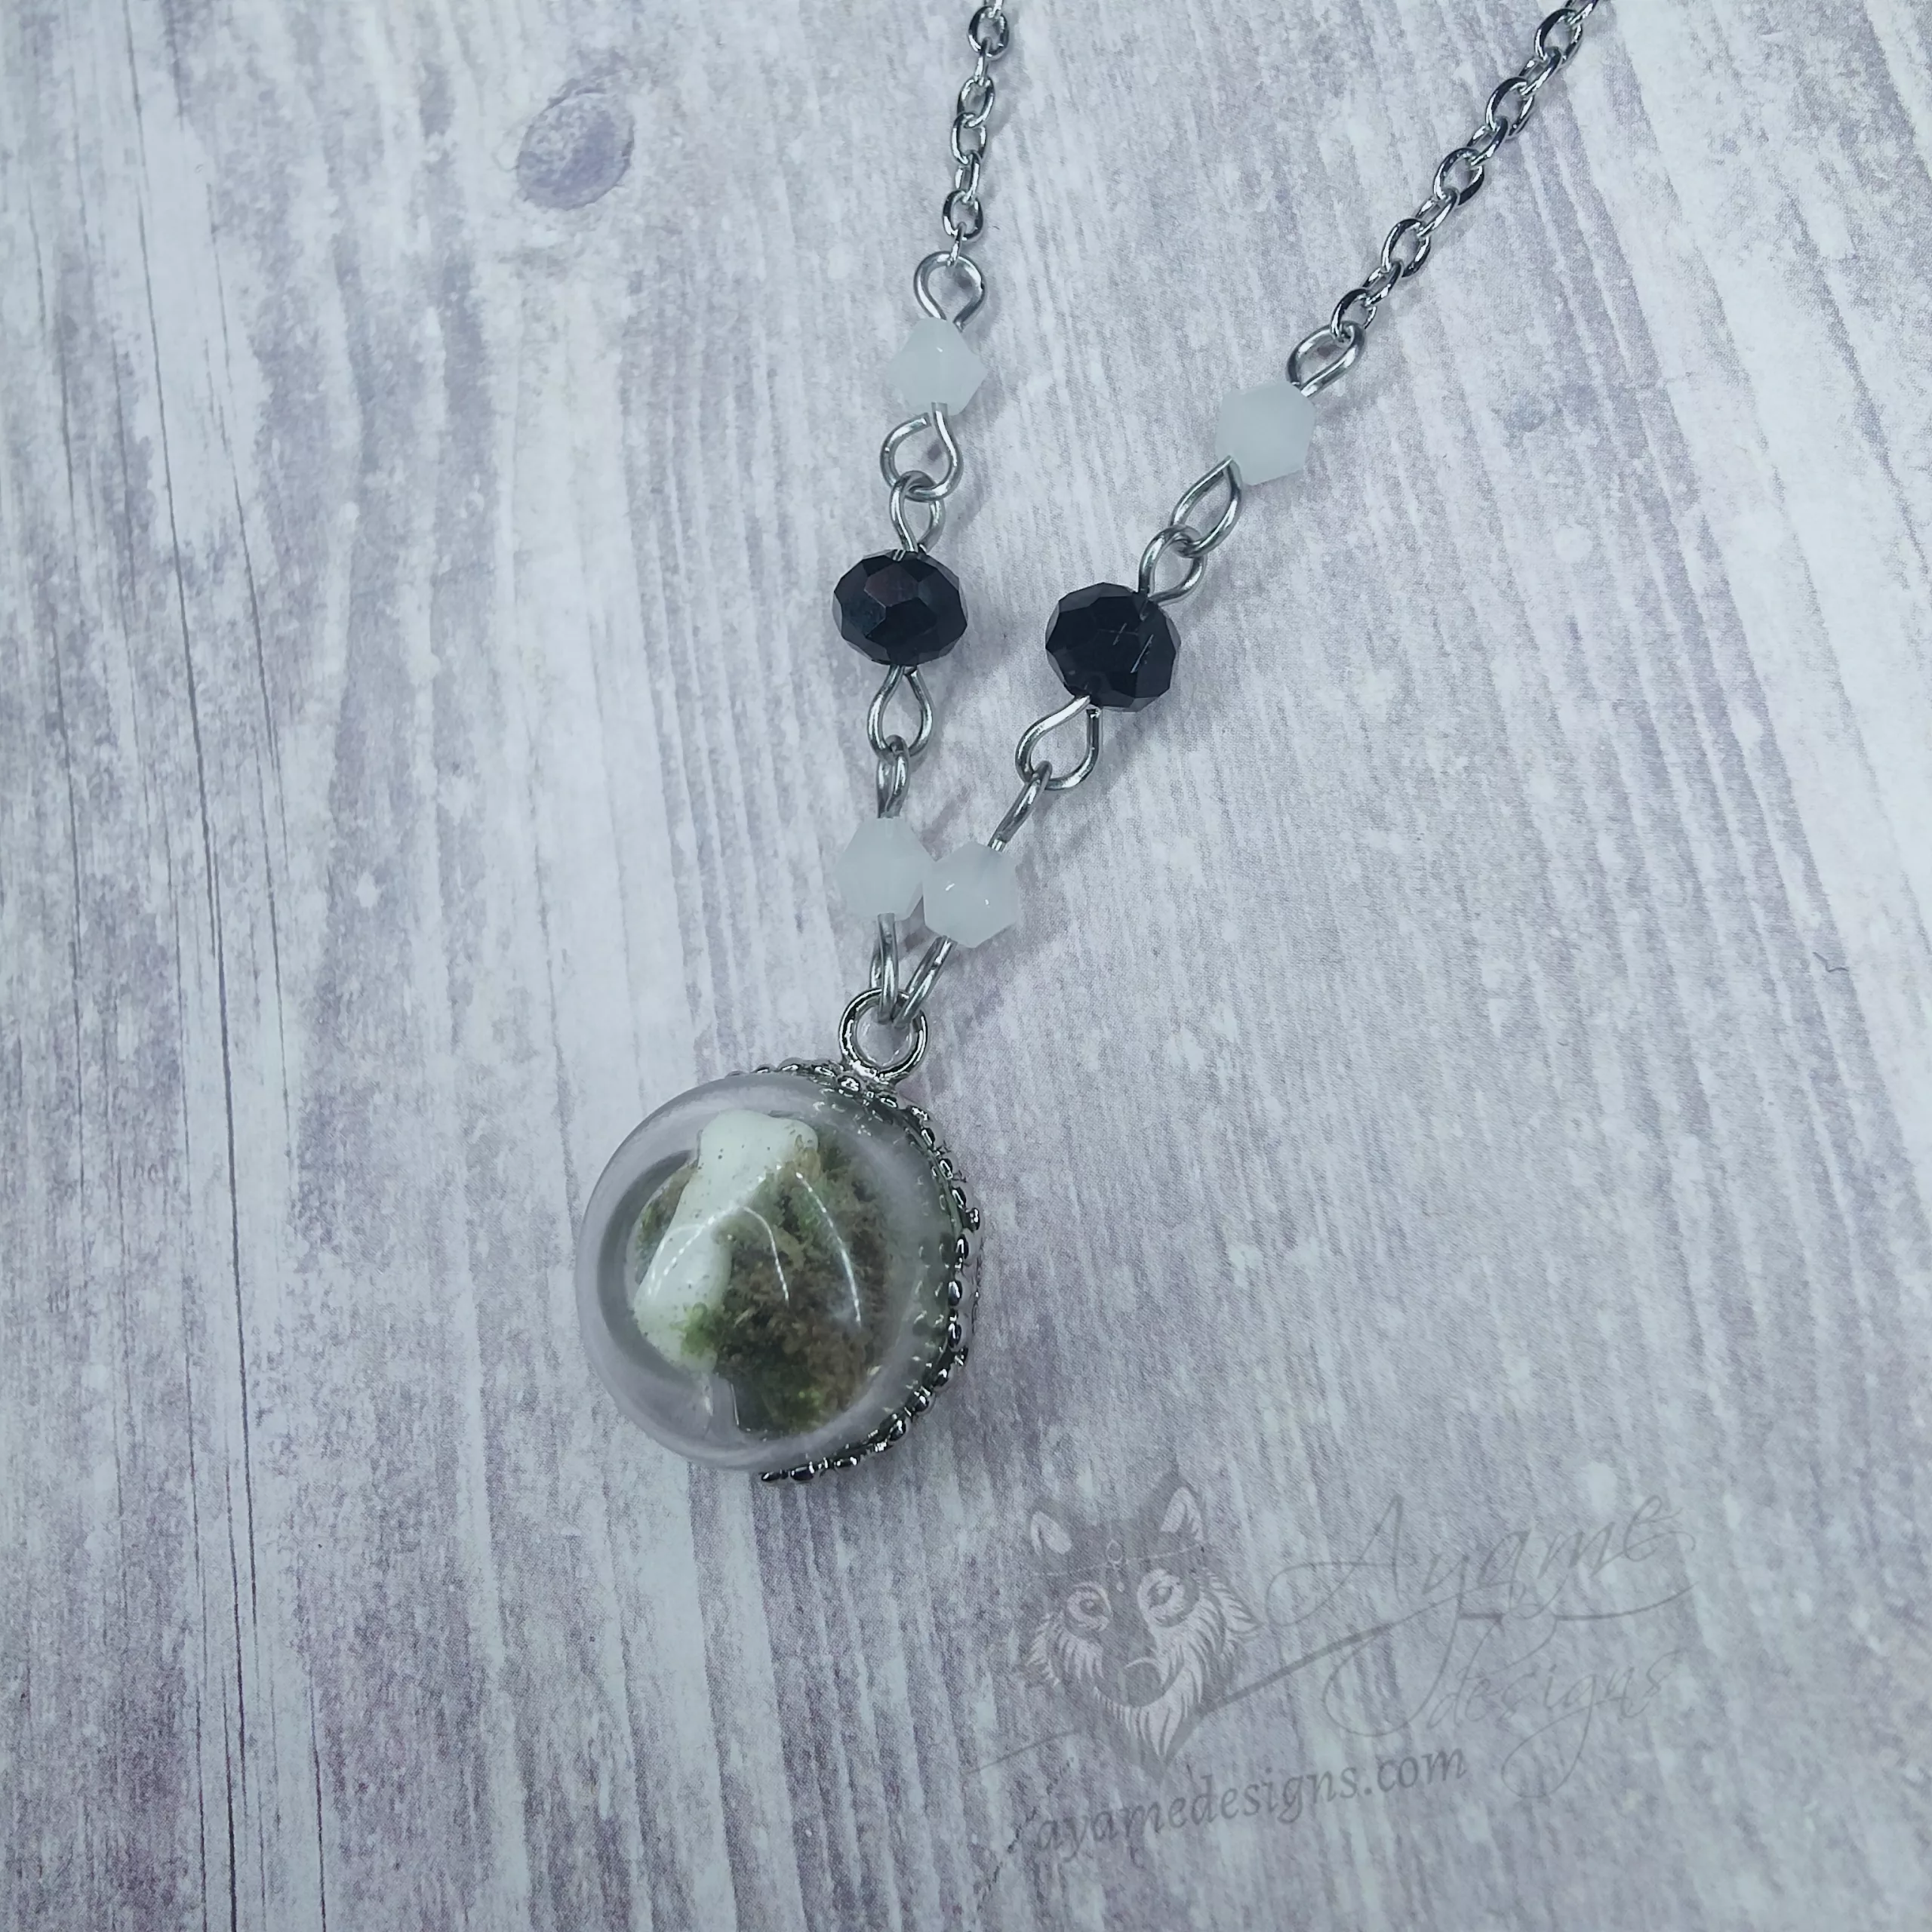 Glass dome necklace with ethically sourced snake vertebrae and moss, white and black Austrian crystal beads and stainless steel chain